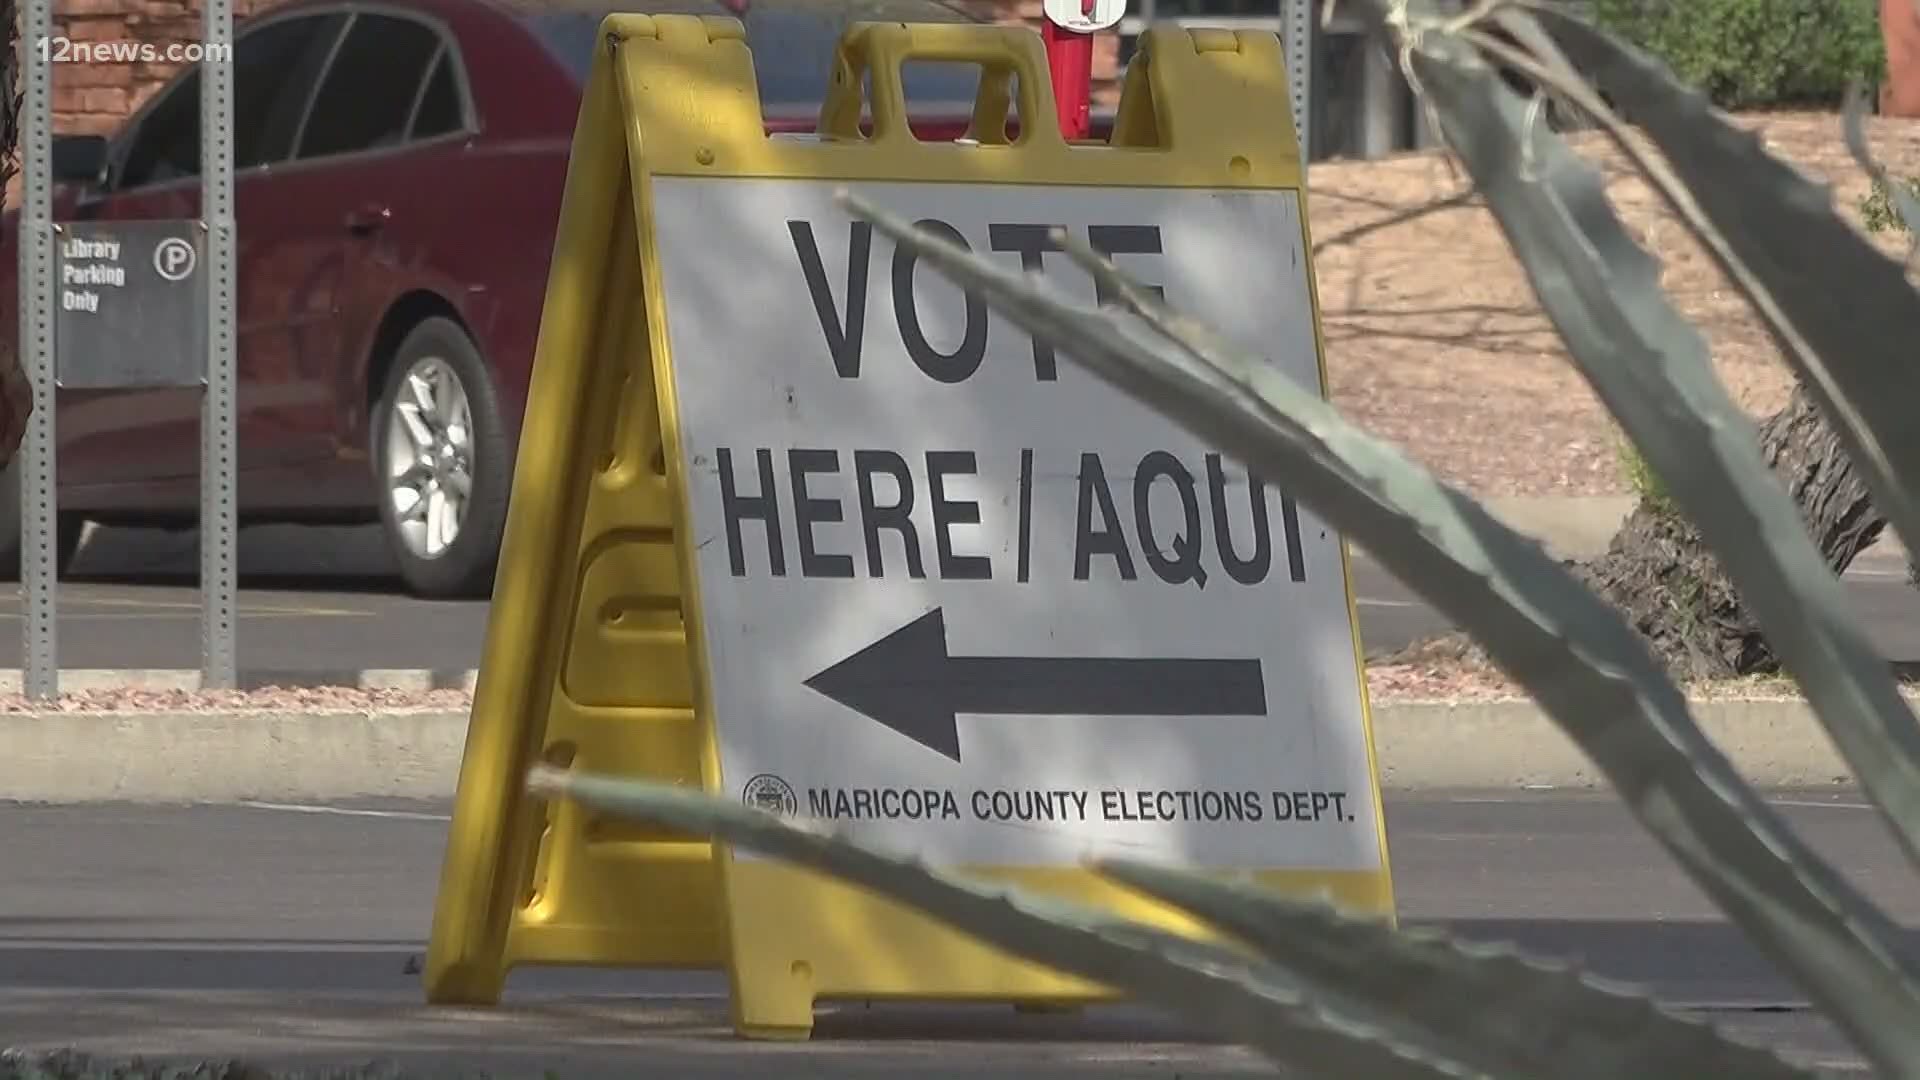 Maricopa Co. election officials will open 100 in-person voting centers to work around the pandemic. Voters will be allowed to vote at any polling place.